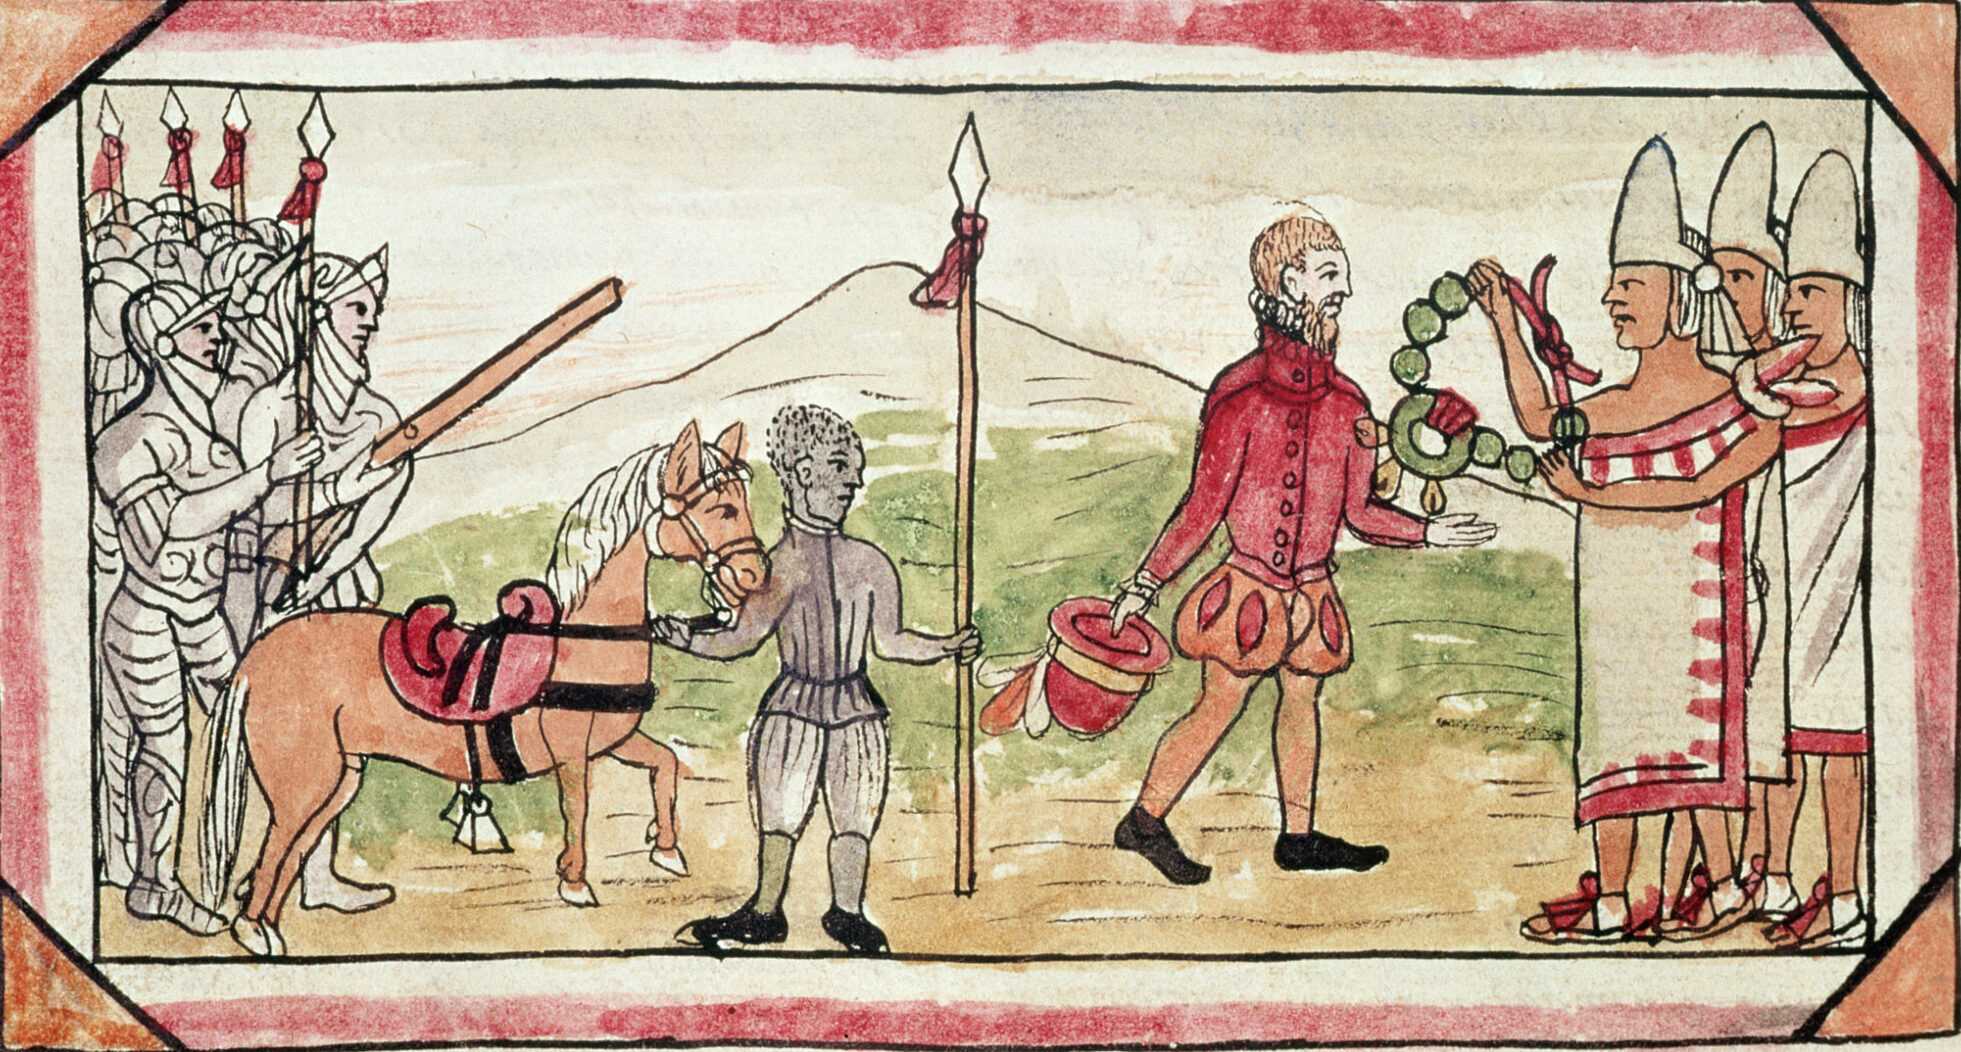 A colored sketch of Hernando Cortés walking towards Native people. An armored army and a slave with a horse stands behind him.